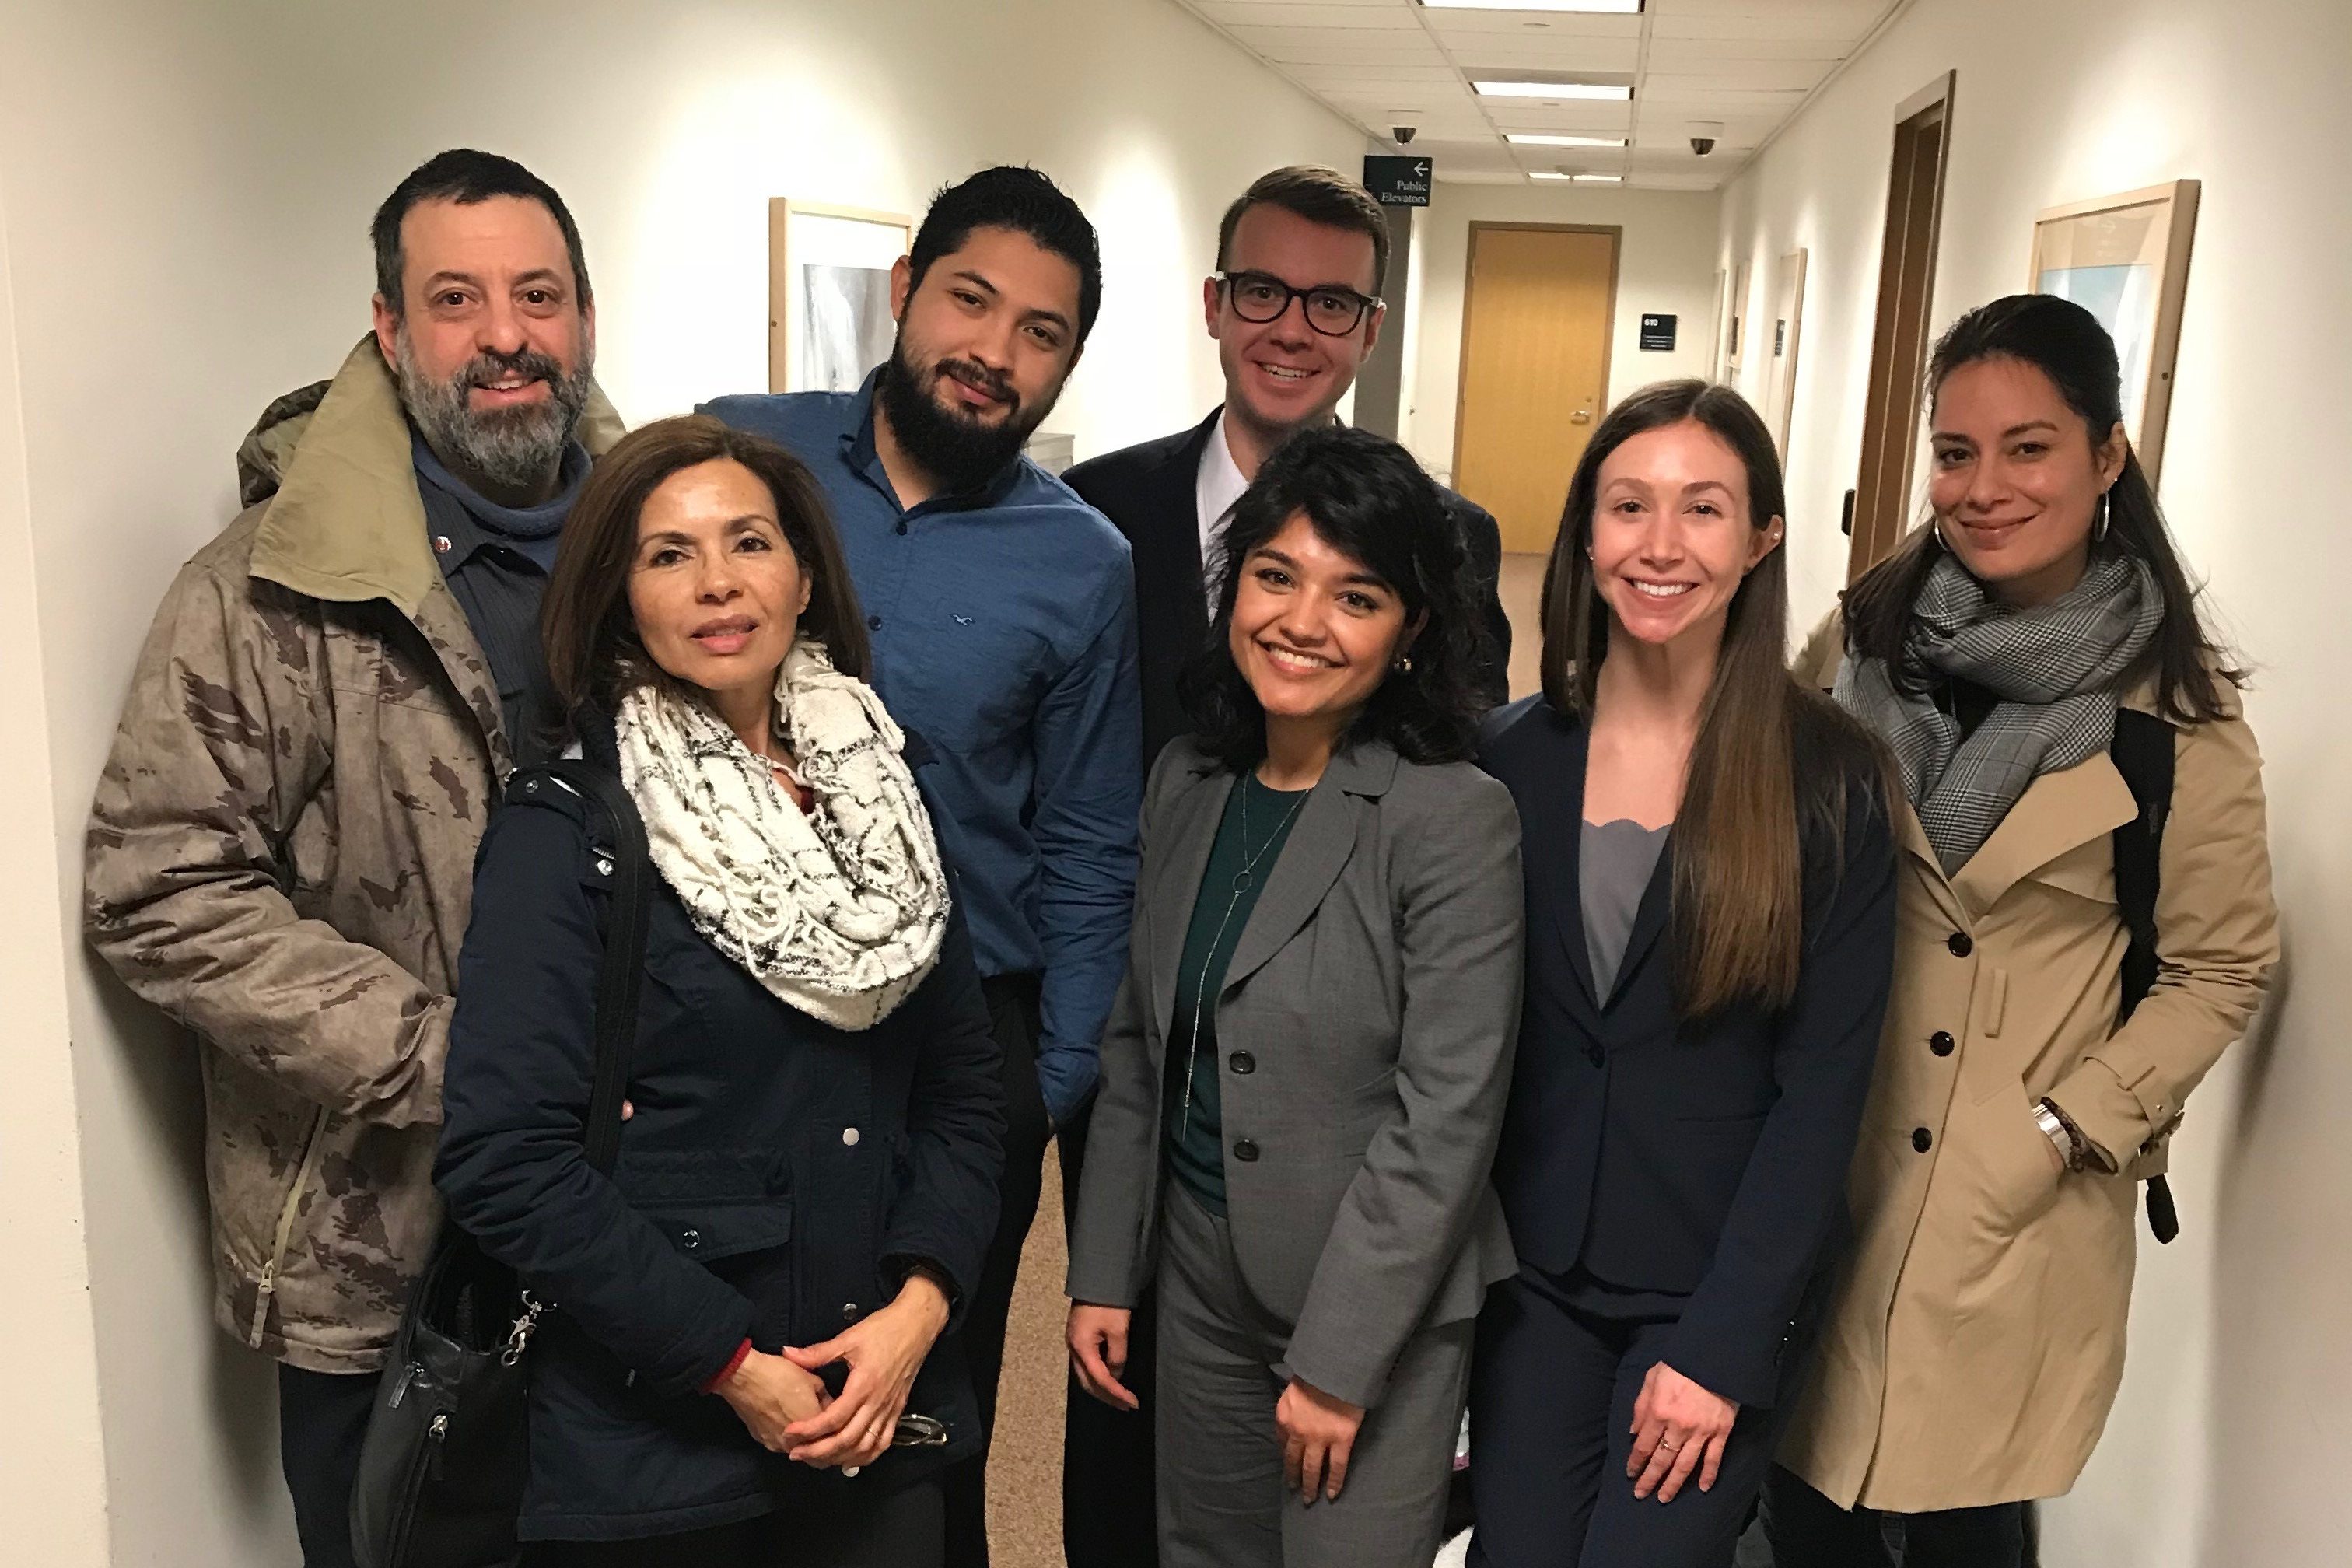 Left to right, two members of the Galdamez family; Franklin René Ruano Galdamez; Adam Kuegler (back) law student; Valeria Gomez, William R. Davis Clinical Fellow at UConn Law; Alexandria Madjeric, law student; and Thais Ortolaza, UConn School of Social Work student intern. (Camille Chill/UConn Photo)